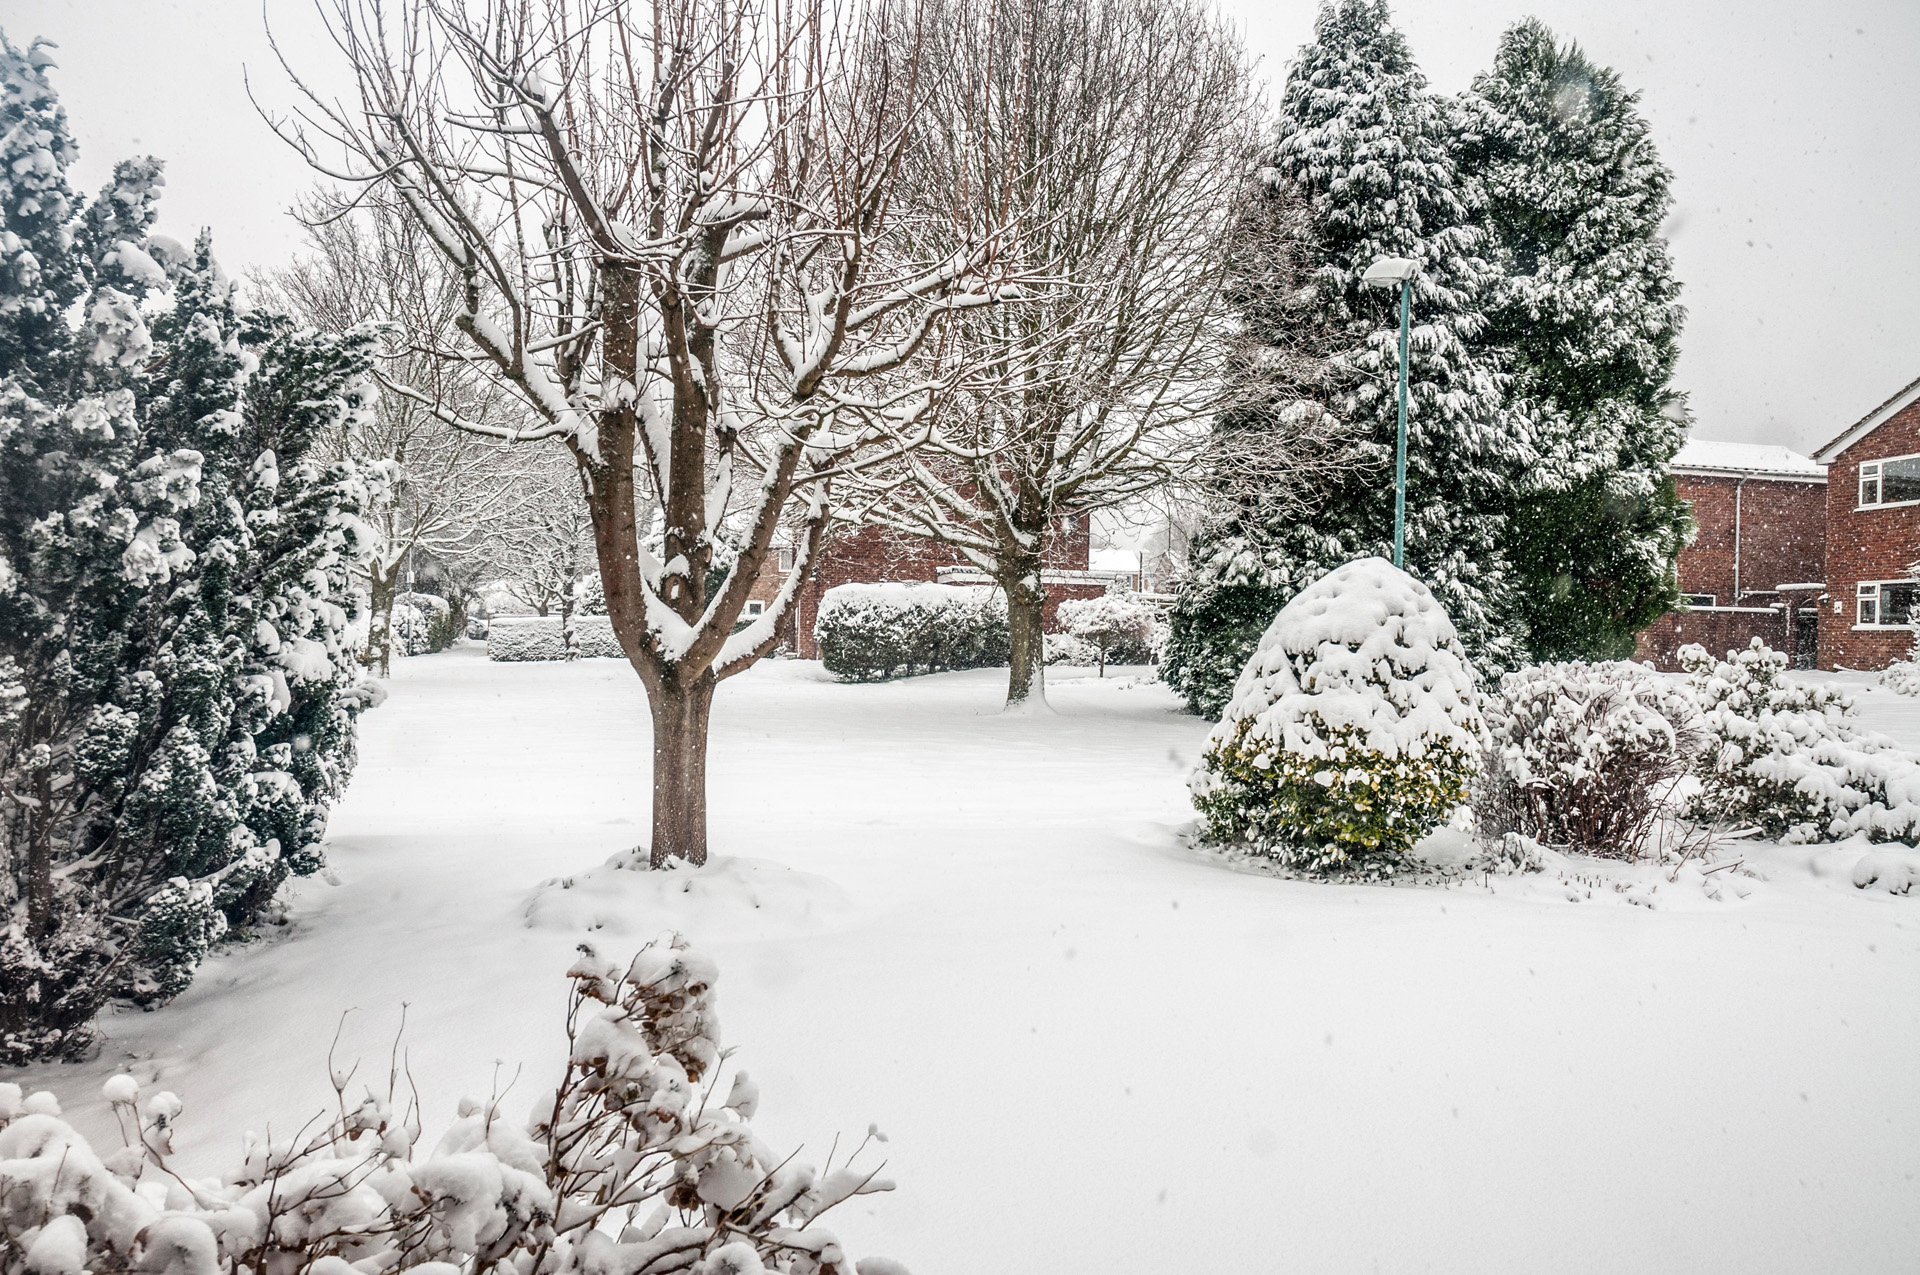 A garden scene with trees and bushes, all covered in snow